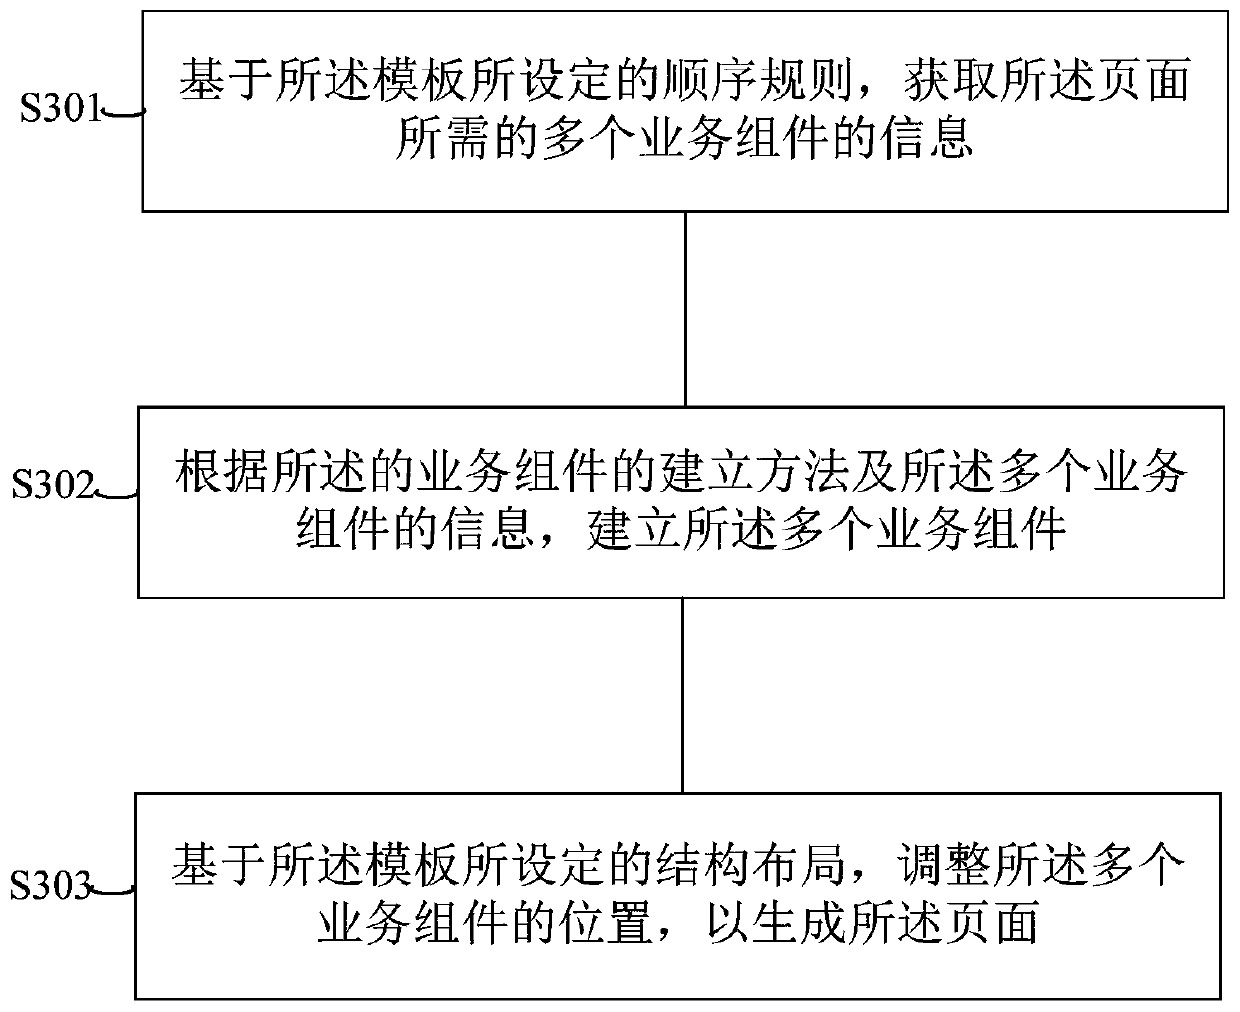 Method and system for establishing service logic component and service component and generating page